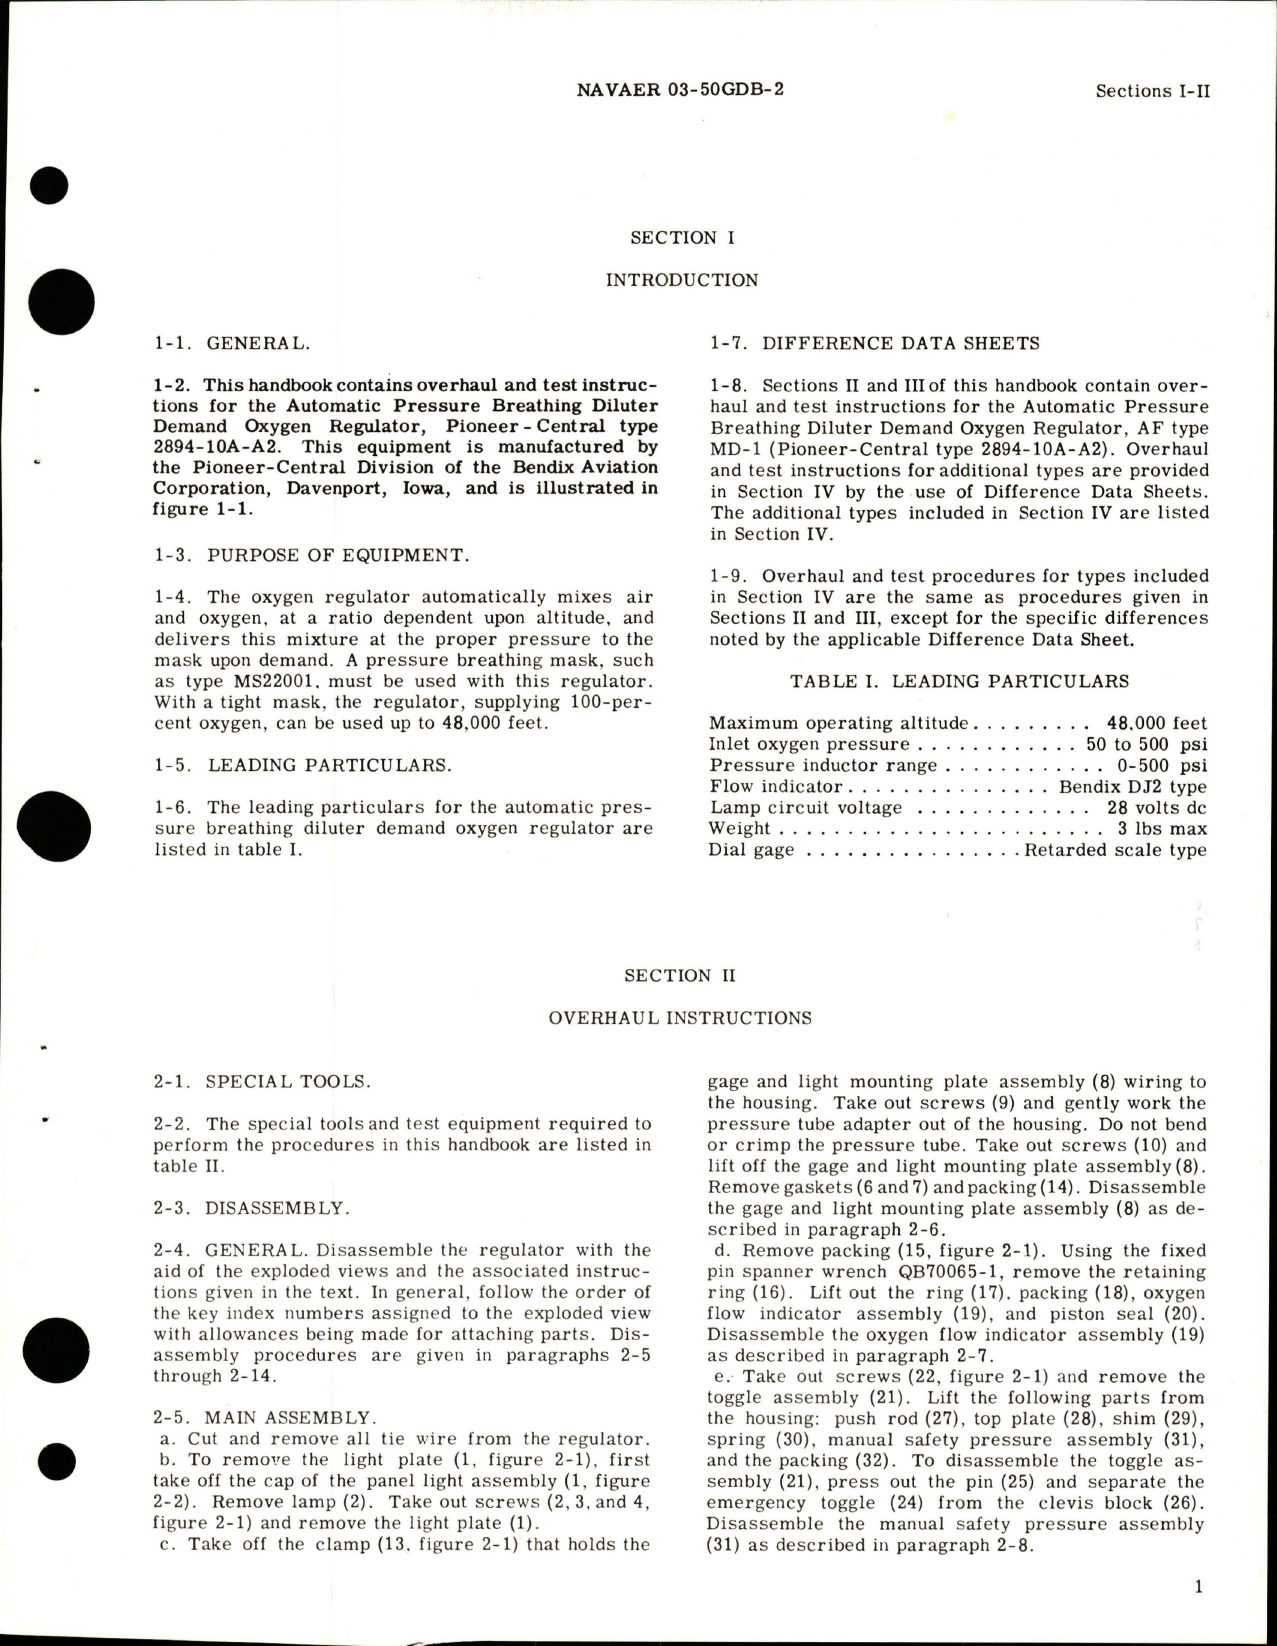 Sample page 5 from AirCorps Library document: Overhaul Instructions for Automatic Diluter Demand Pressure Breathing Oxygen Regulator - Parts 2894-10A-A2, 2894-6B-A4, 2894-10A-B2, 2894-6B-B2, and 2894-10A-A2A